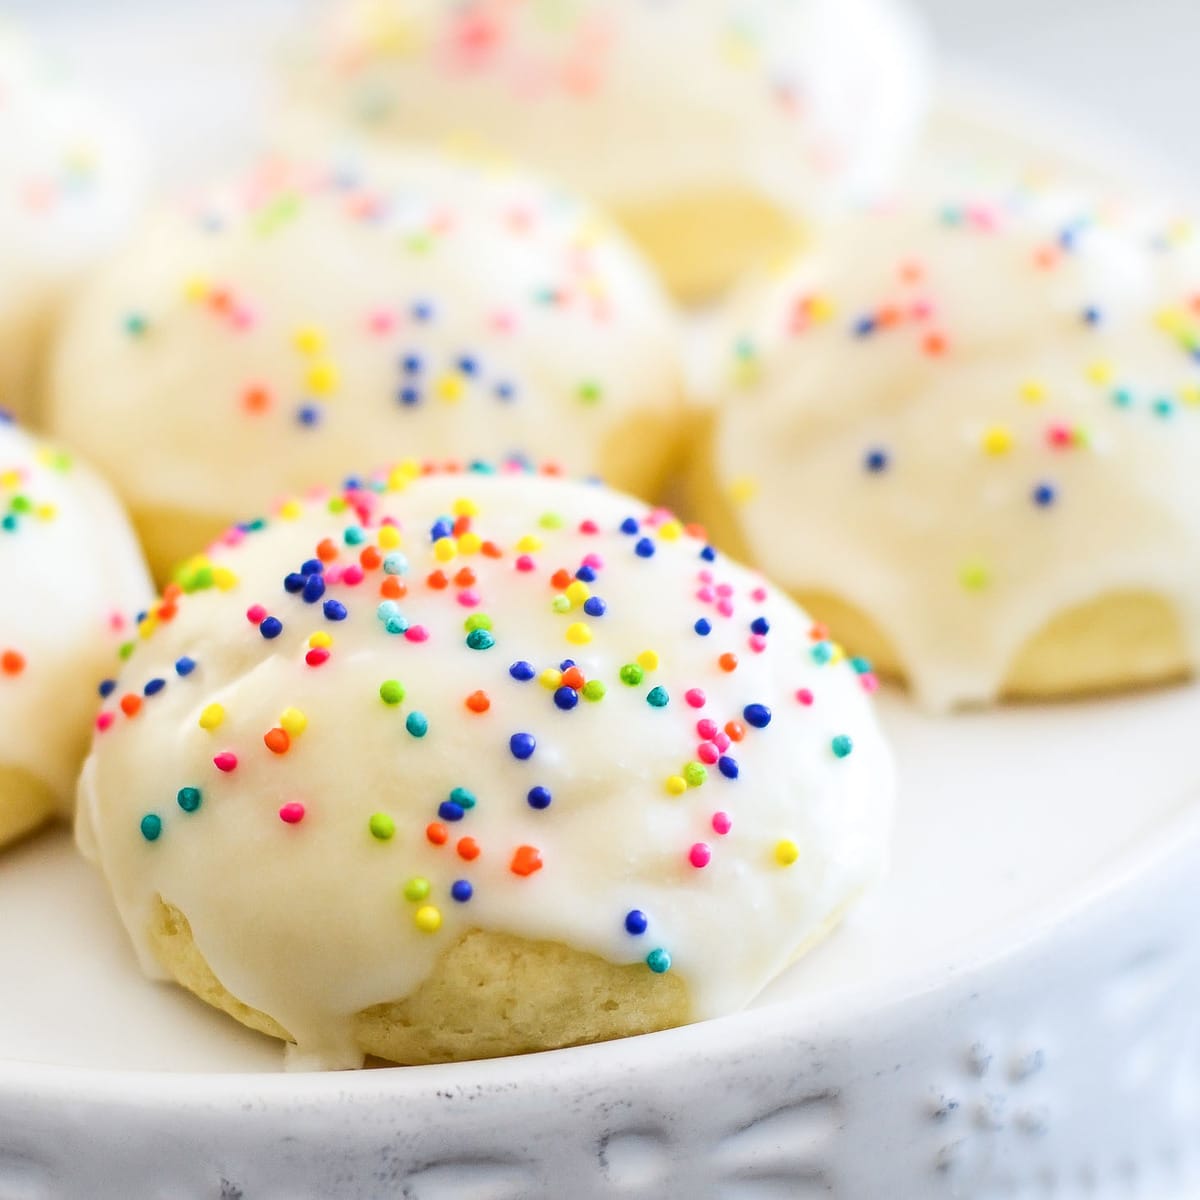 Italian Christmas Dinner ideas - frosted Italian cookies topped with sprinkles.